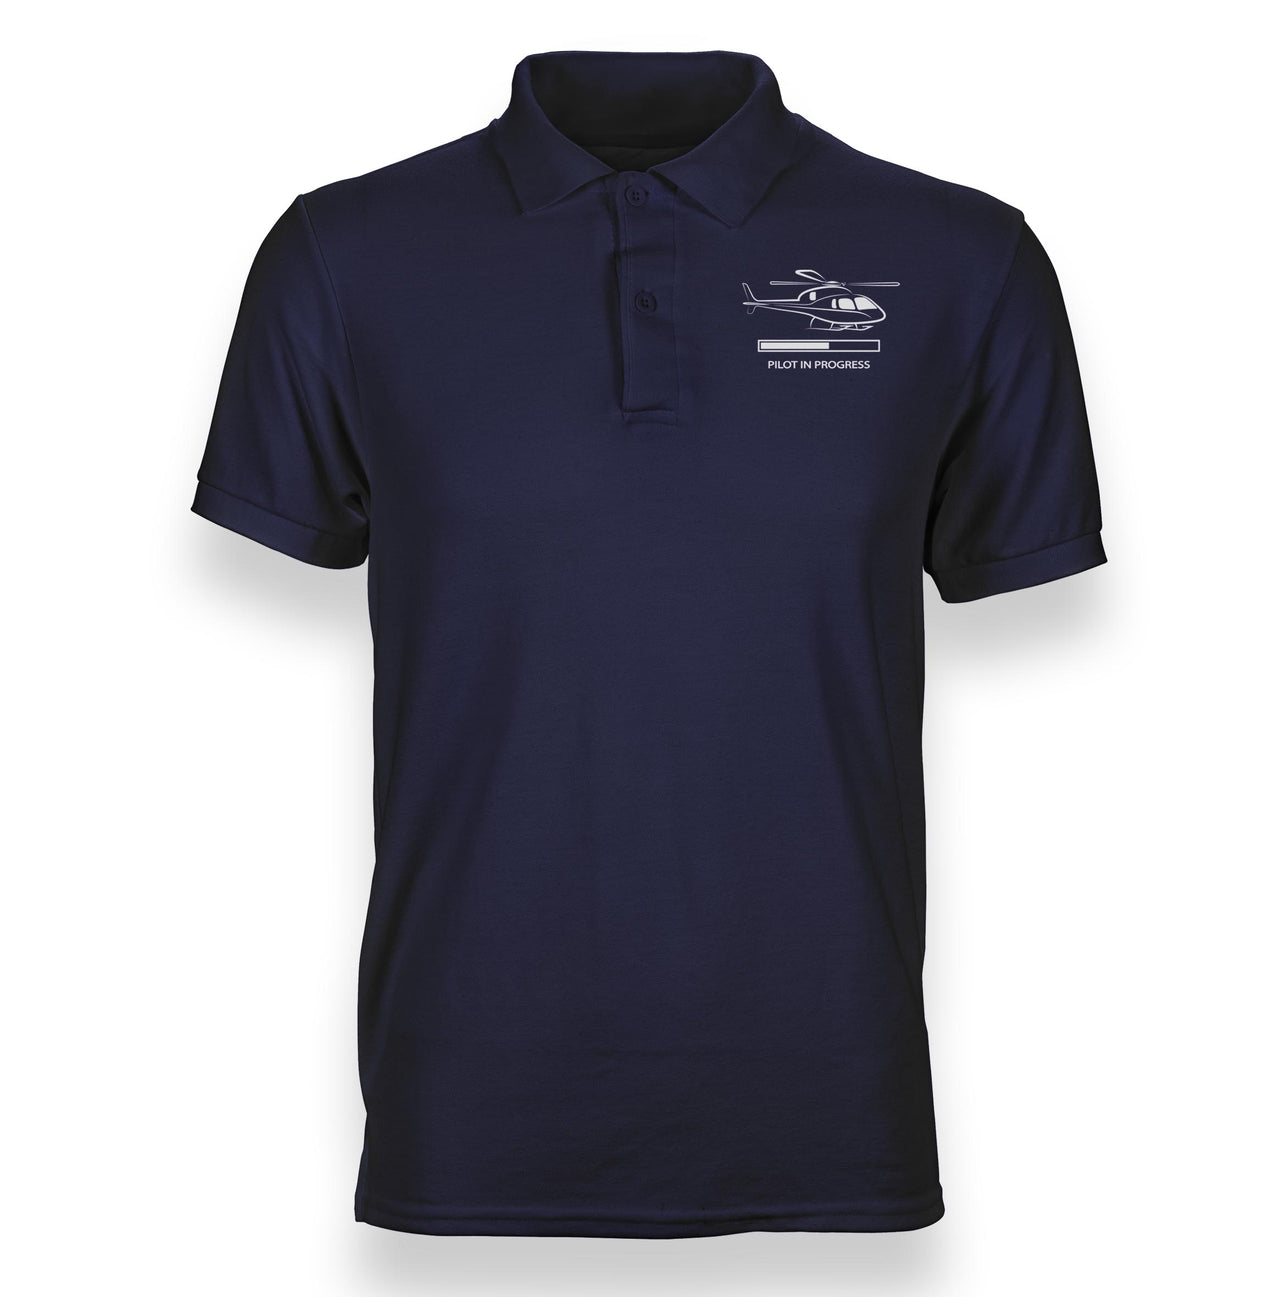 Pilot In Progress (Helicopter) Designed Polo T-Shirts